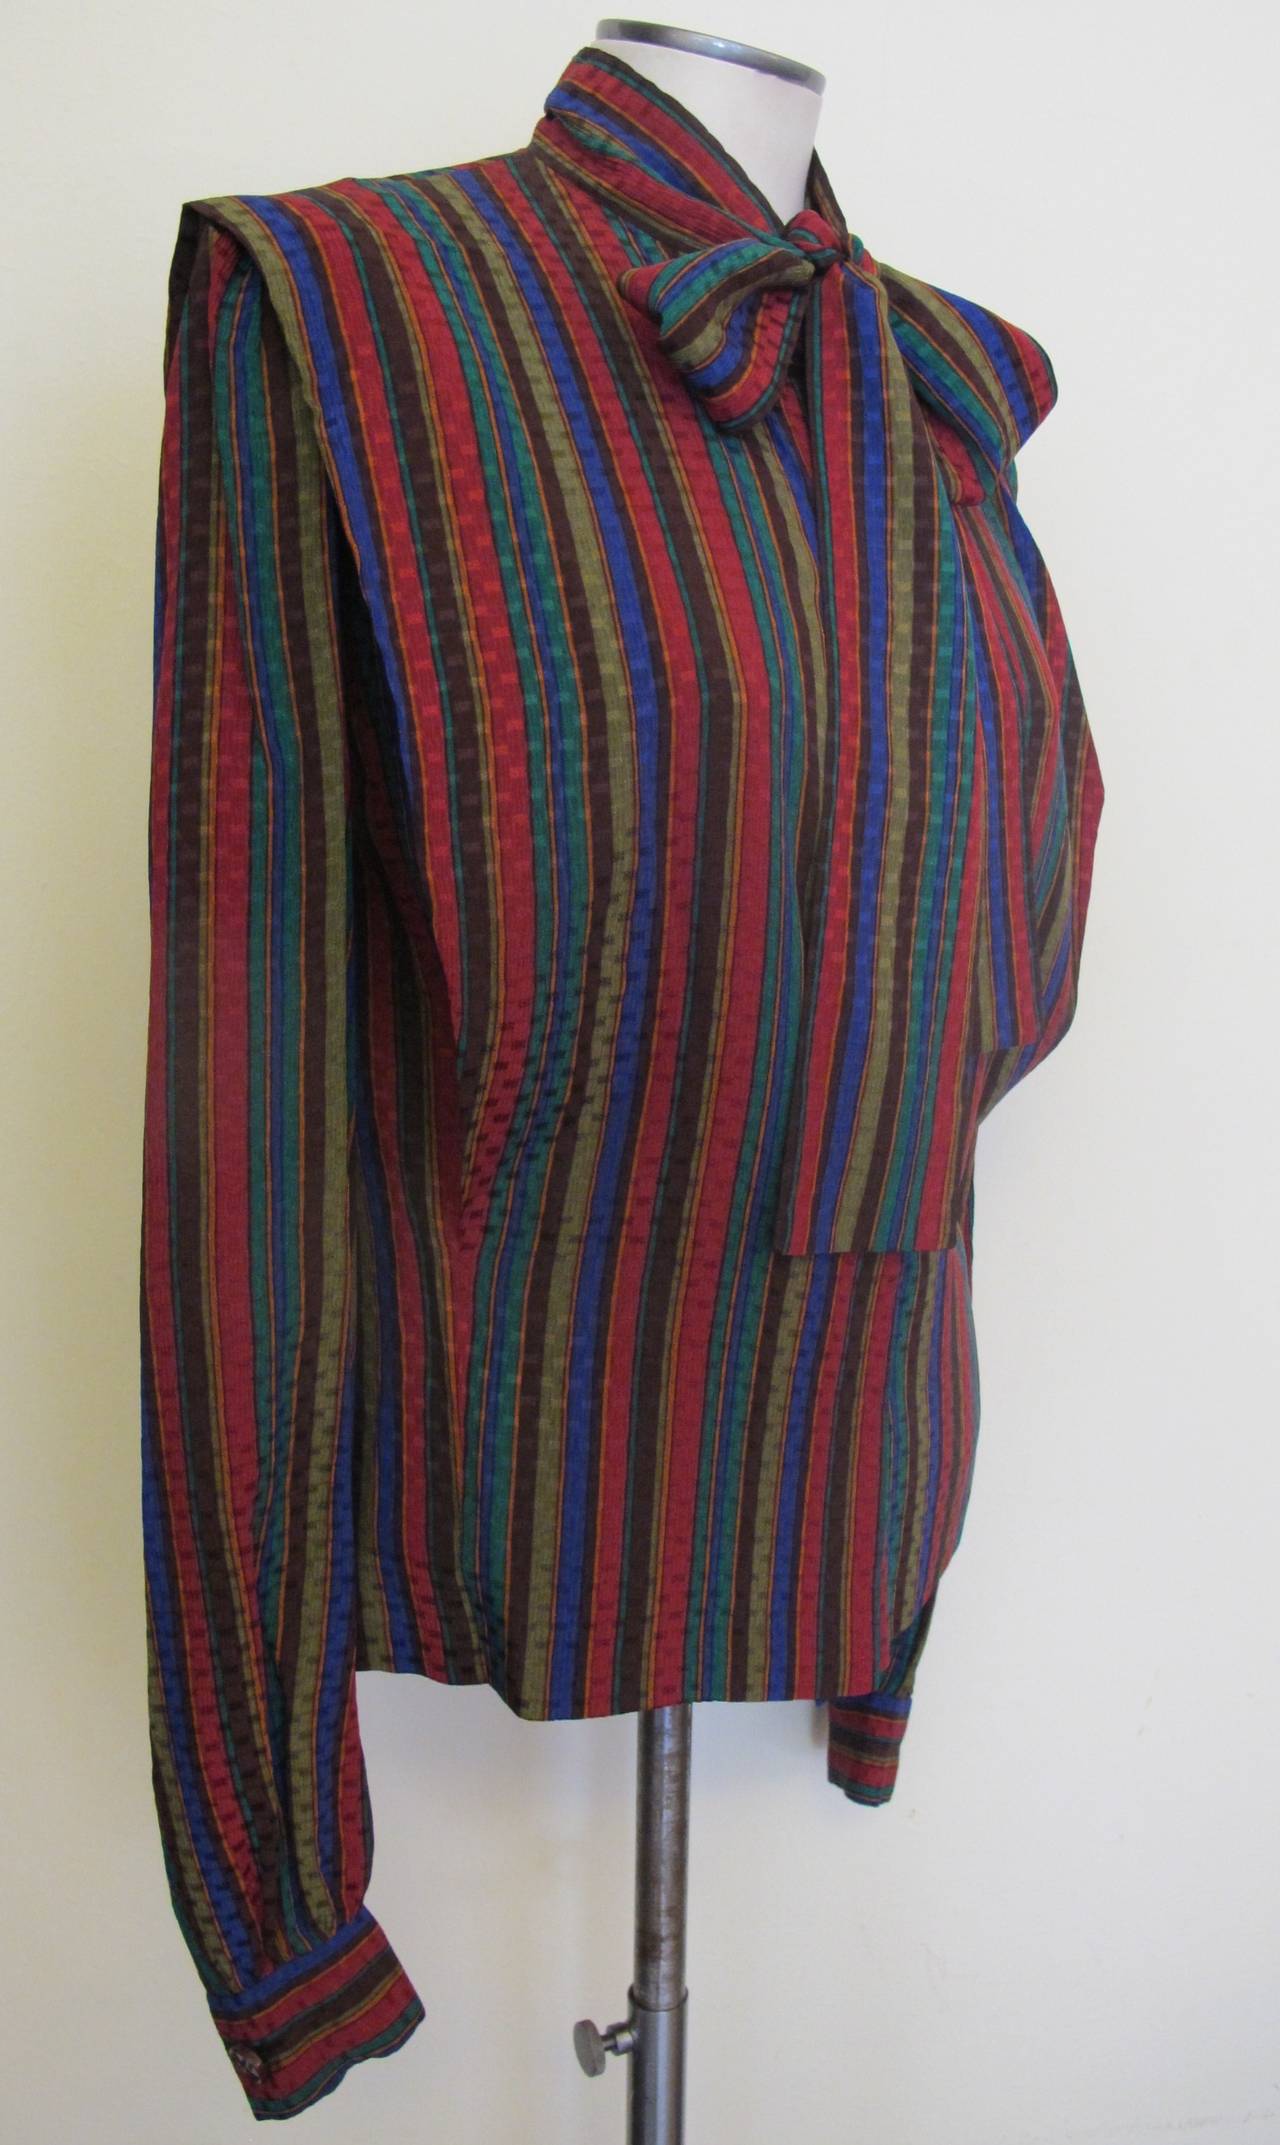 This elegant Boutique Givenchy Blouse is multi-colored stripes: brown, emerald green, maroon, royal blue and olive. Fits size 12-14 (US). Sleeve length measures 26 inches. Shoulder to shoulder measures 16.5 inches.